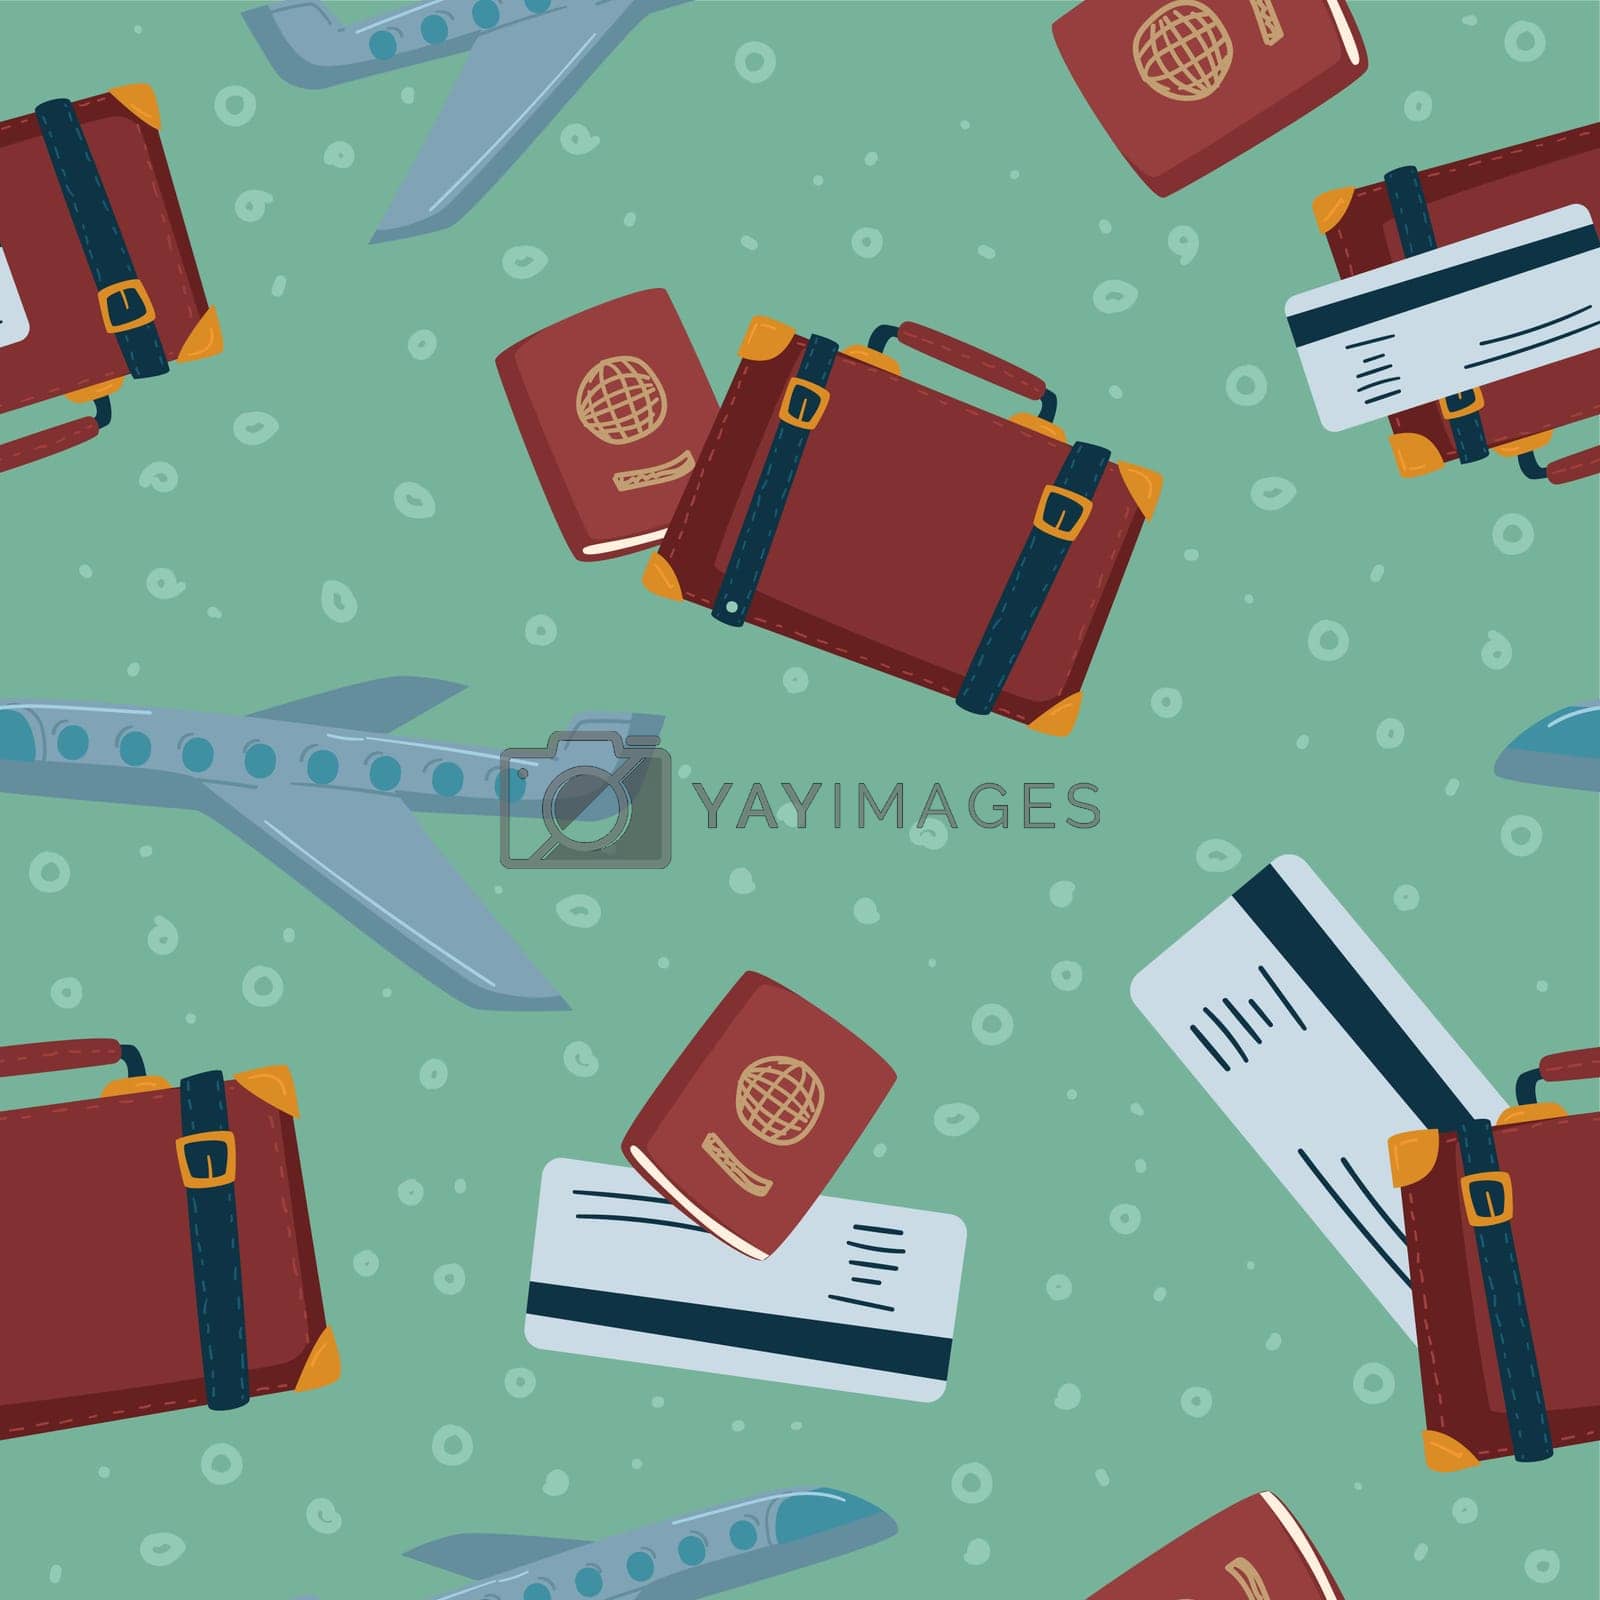 Royalty free image of Going on trip or vacation, passport and ticket by Sonulkaster